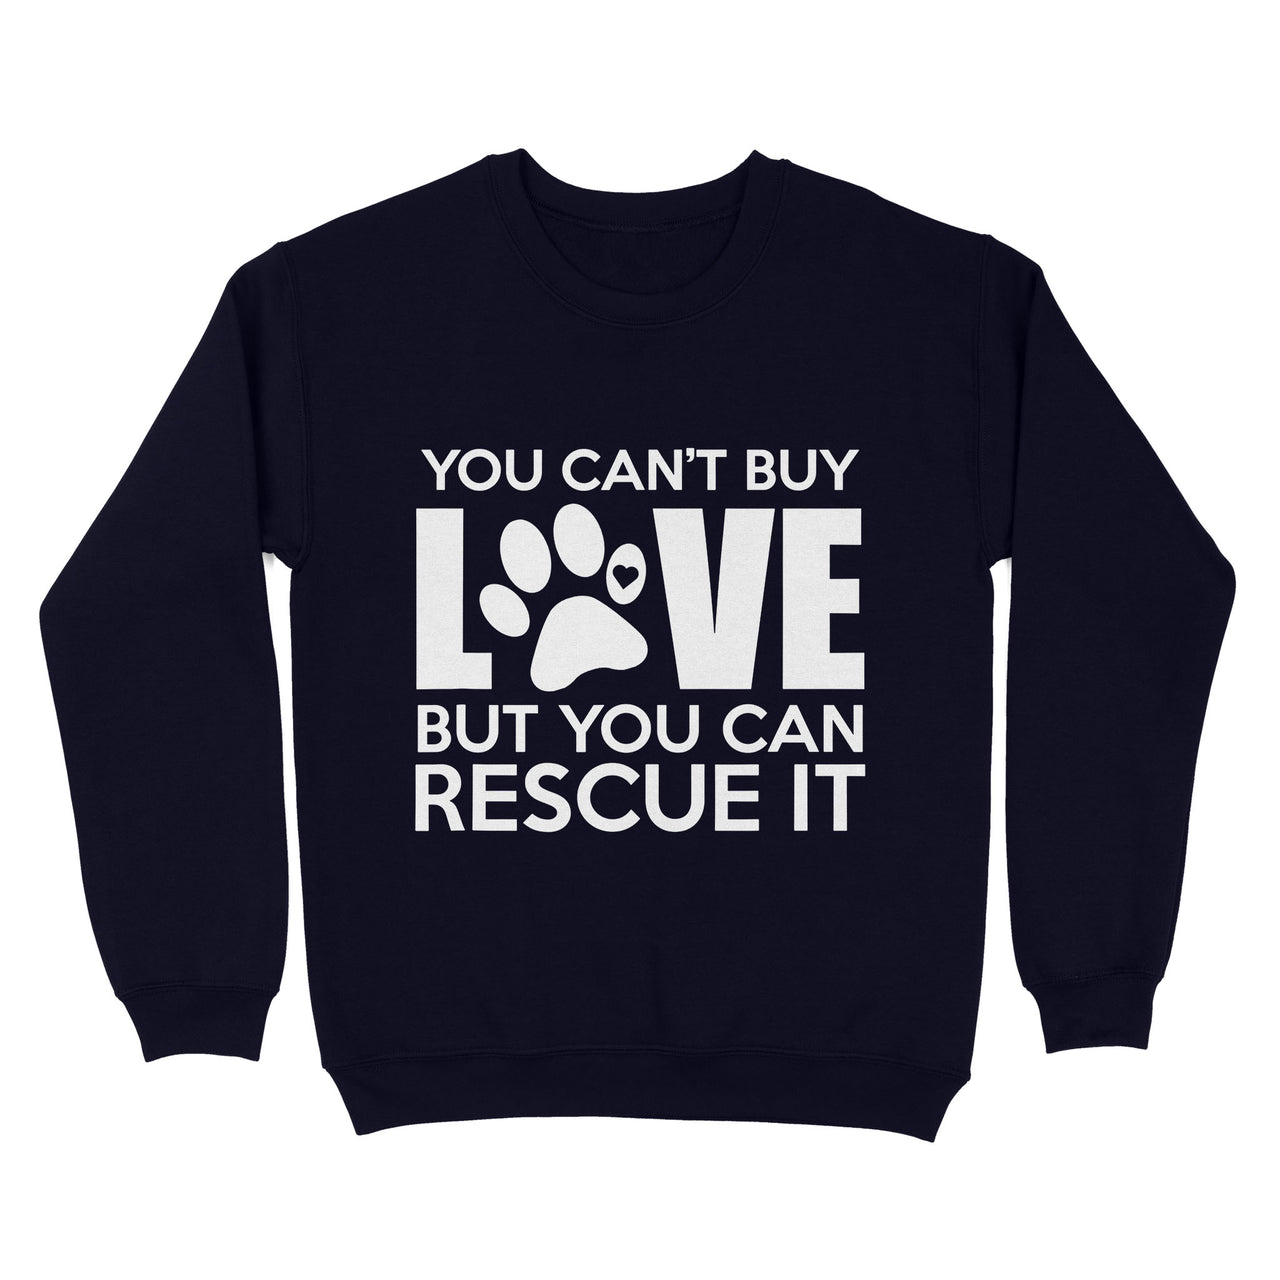 Gift For Dog Lover - You Can't Buy Love But You Can Rescue It - Standard Crew Neck Sweatshirt